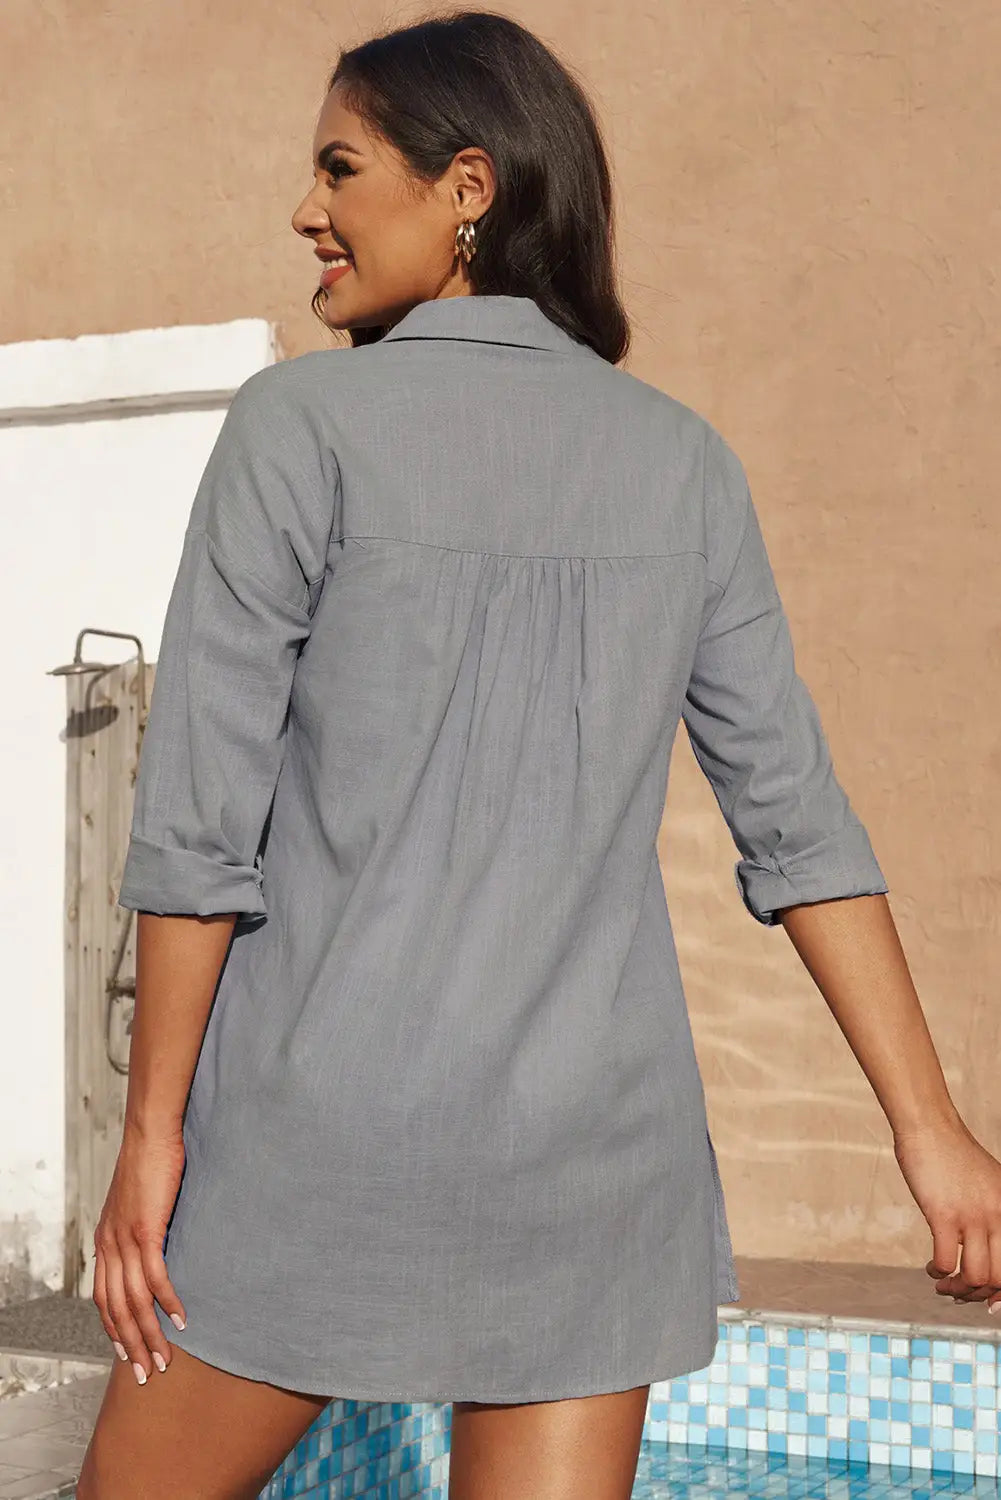 Gray lightweight shirt style beach cover up - cover-ups